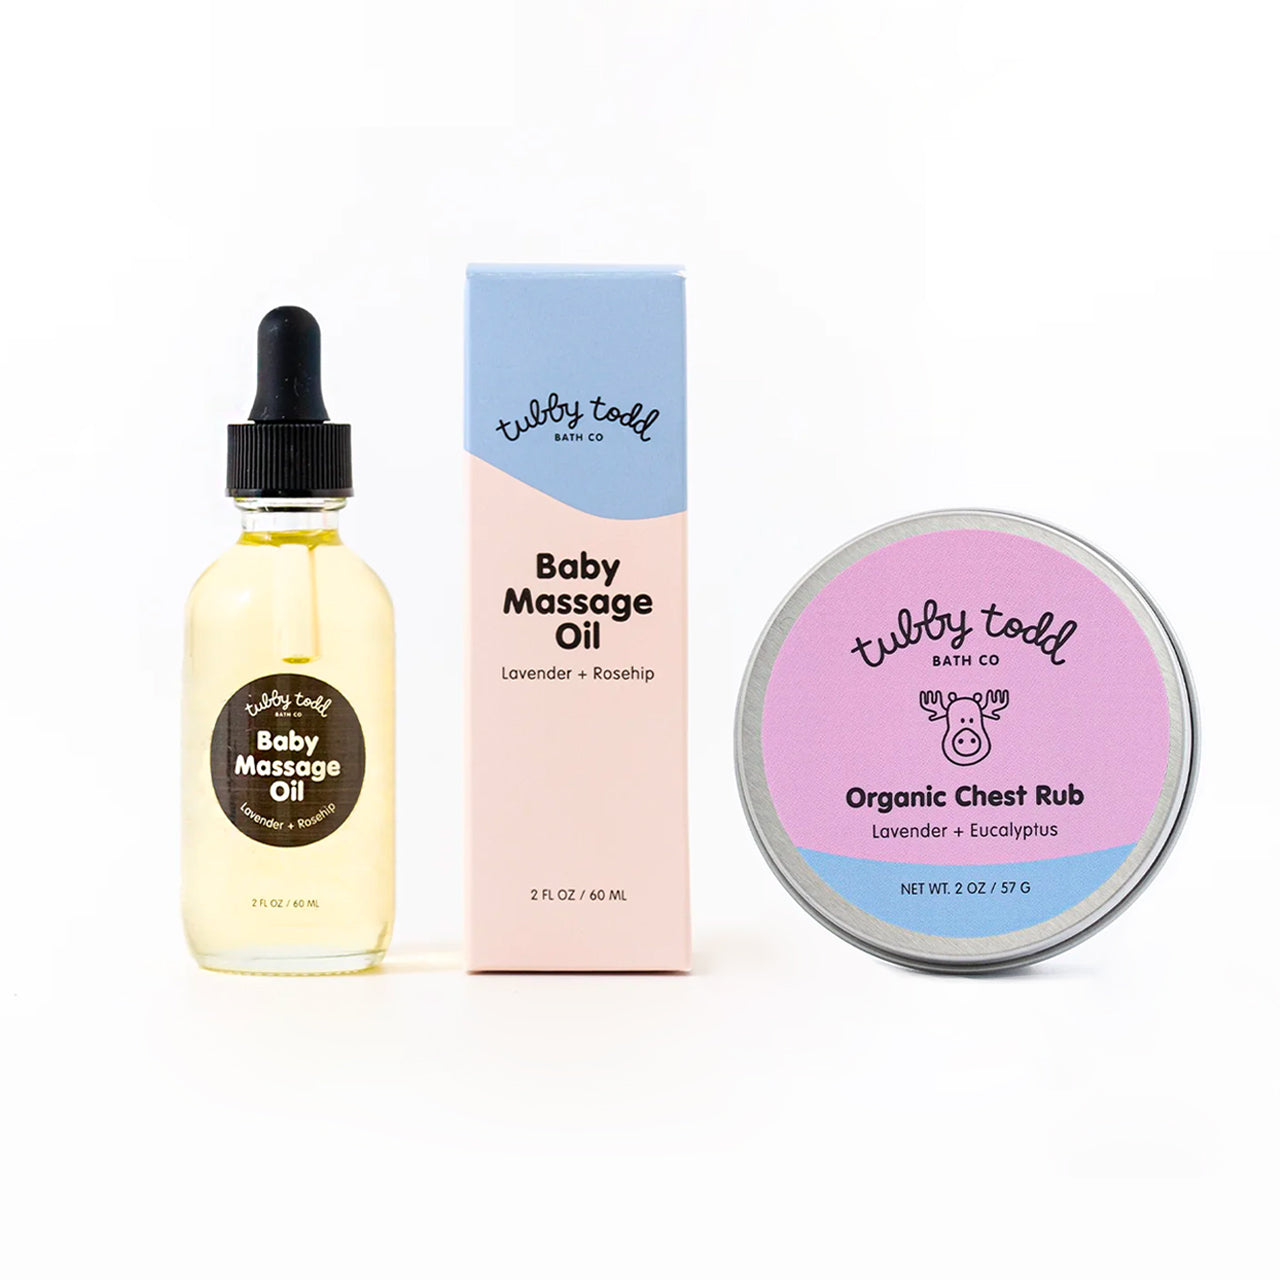 Belly Oil, Baby Massage Oil, and Organic Chest Rub